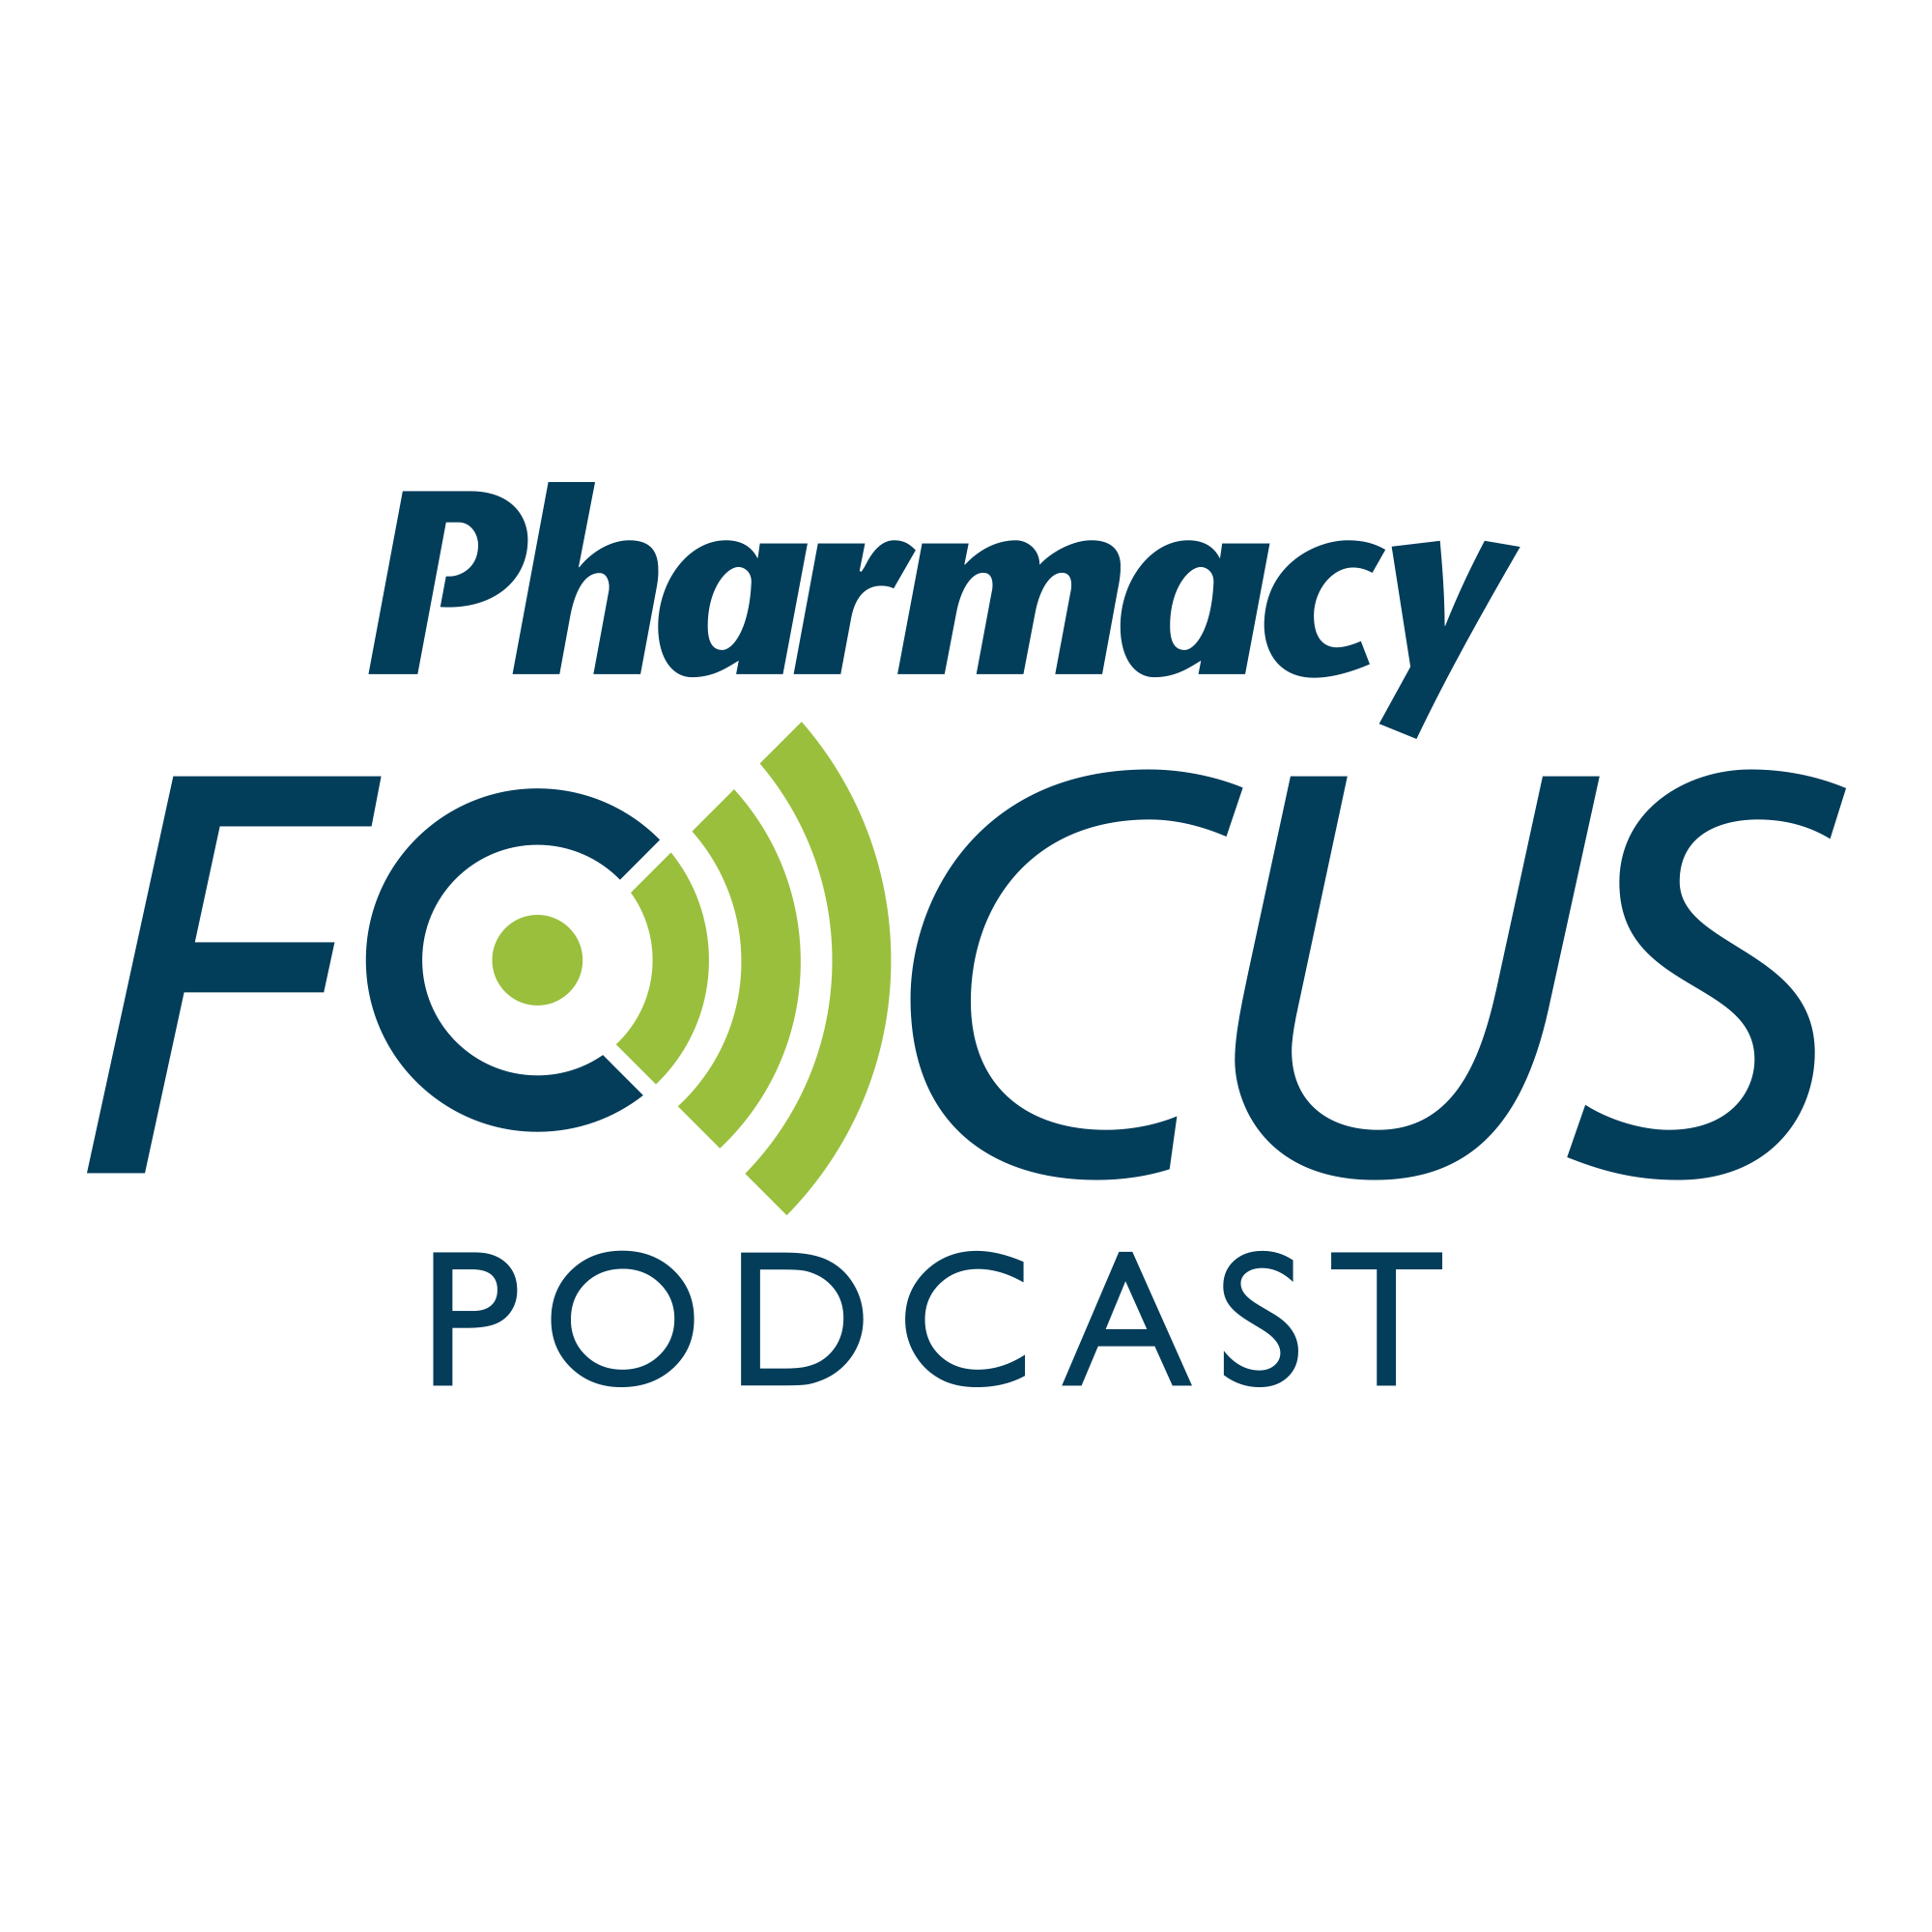 Pharmacy Focus Episode 4: Expanding the Role of Pharmacy Technicians